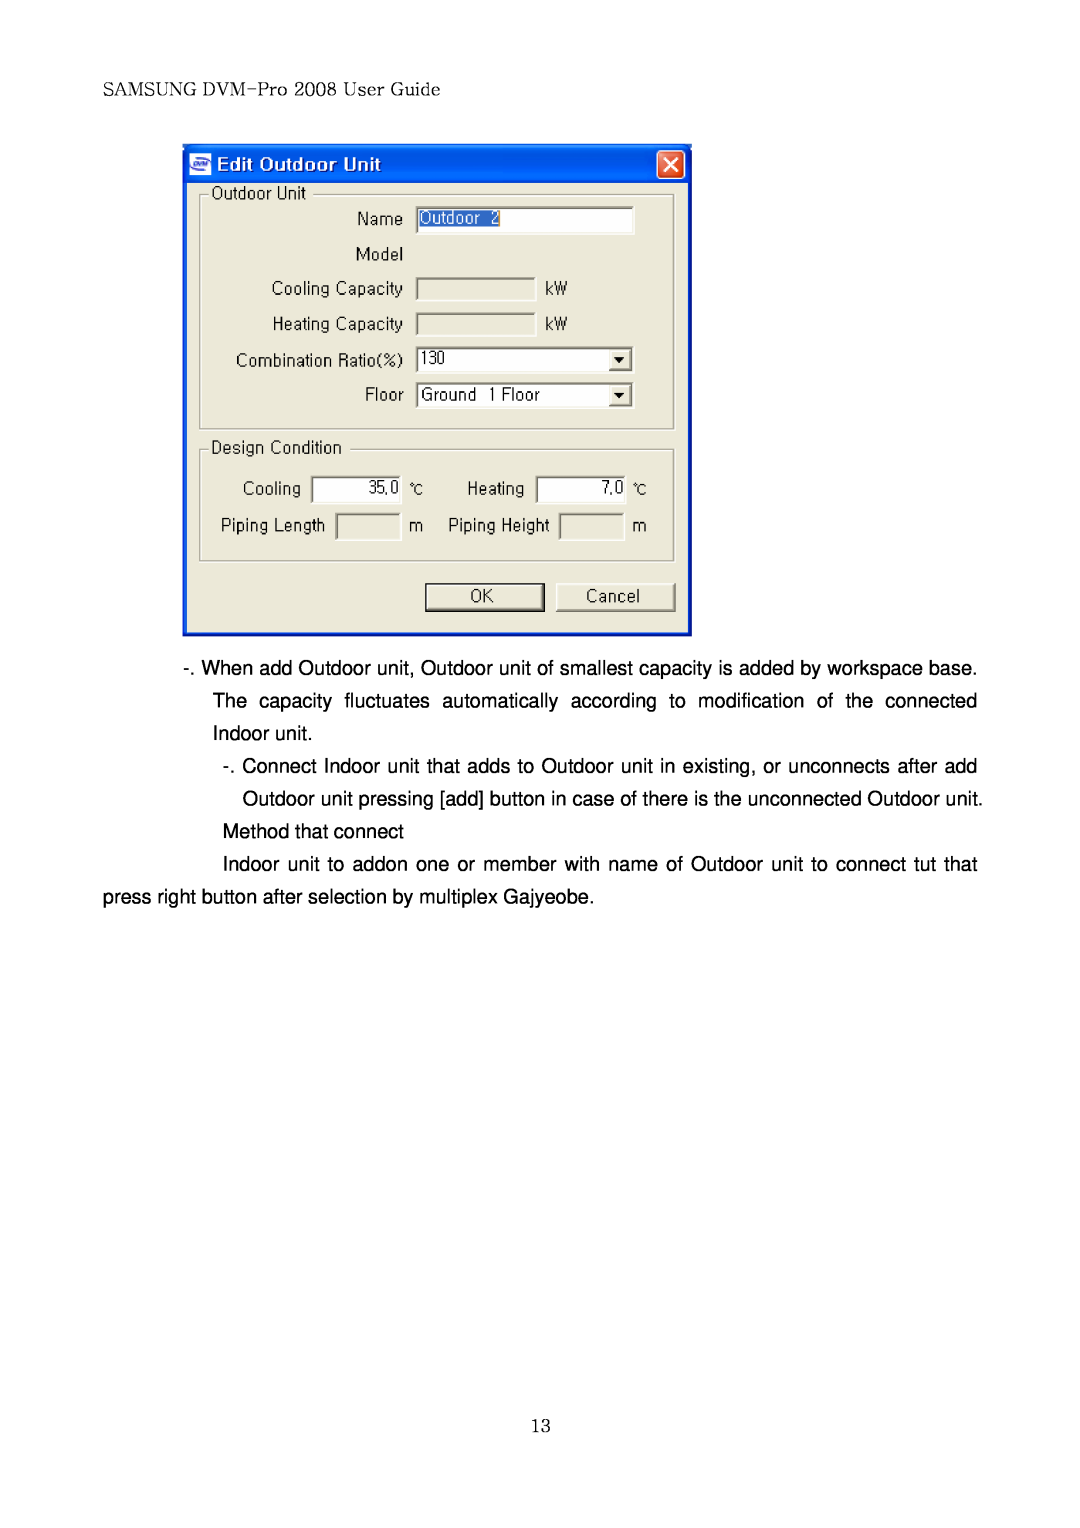 Samsung DVM-PRO 2008 user manual Method that connect 